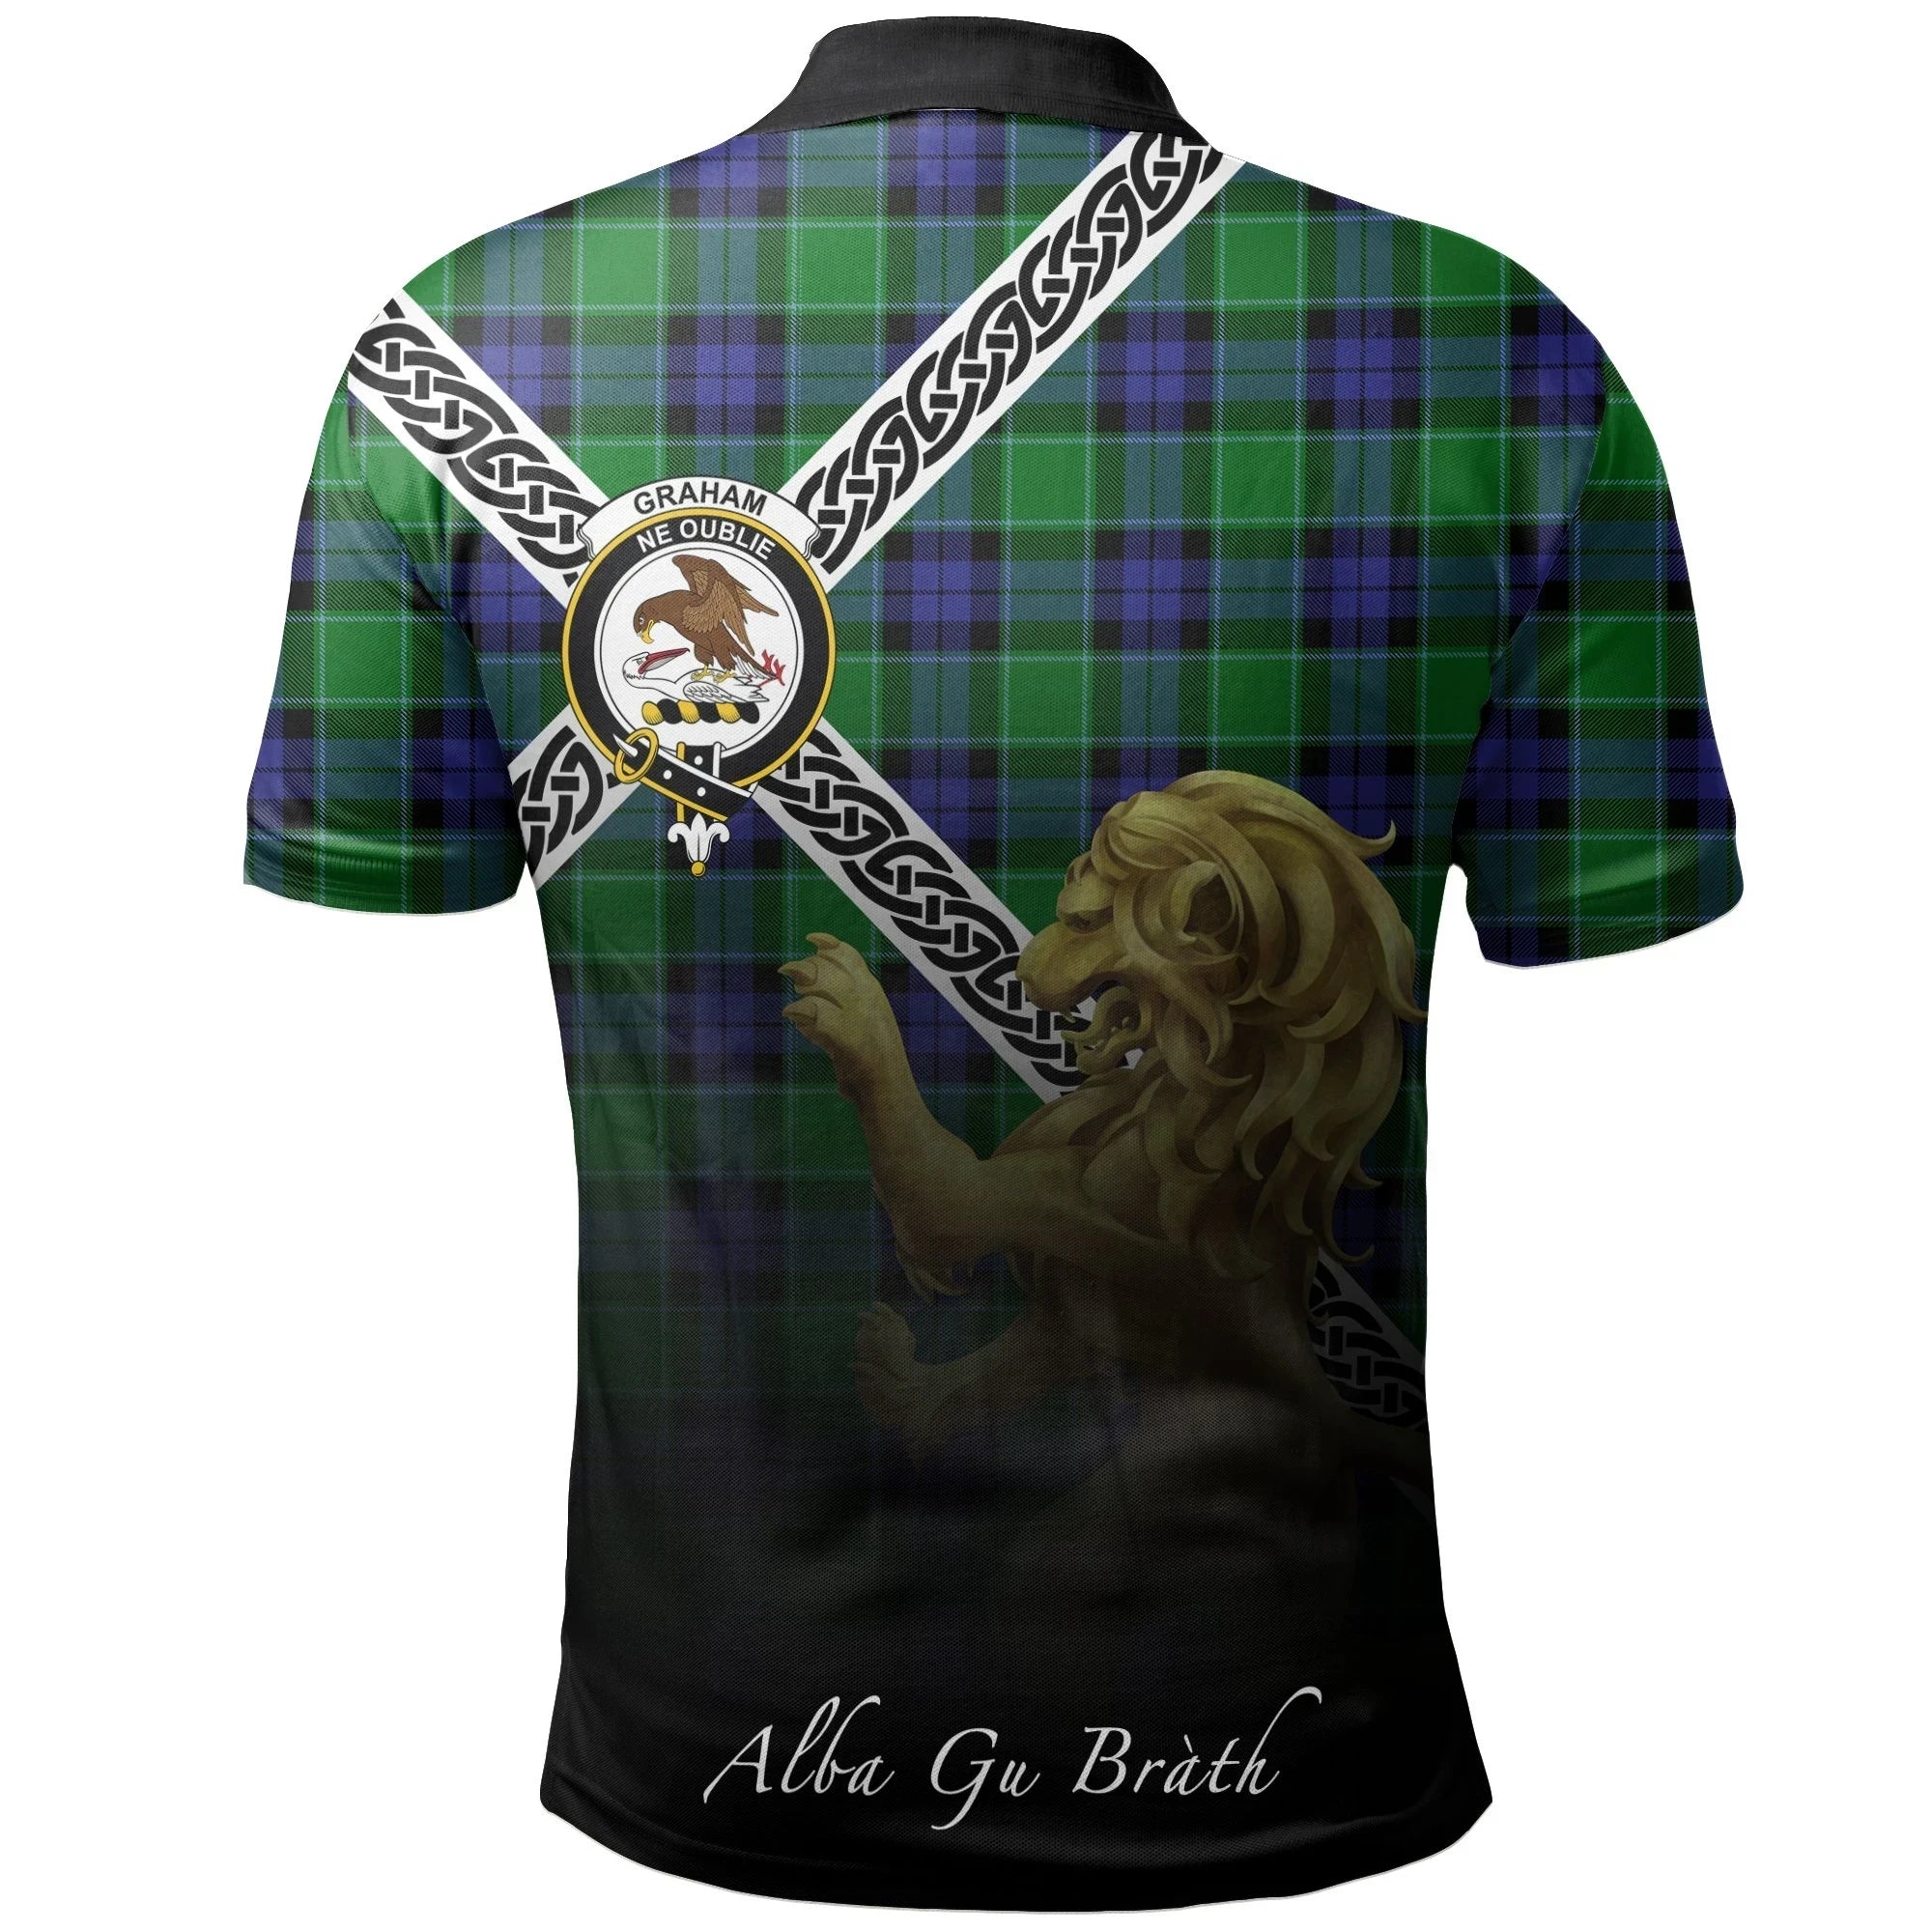 Graham of Menteith Modern Clan Polo Shirt, Scottish Tartan Graham of Menteith Modern Clans Polo Shirt Celtic Lion Style